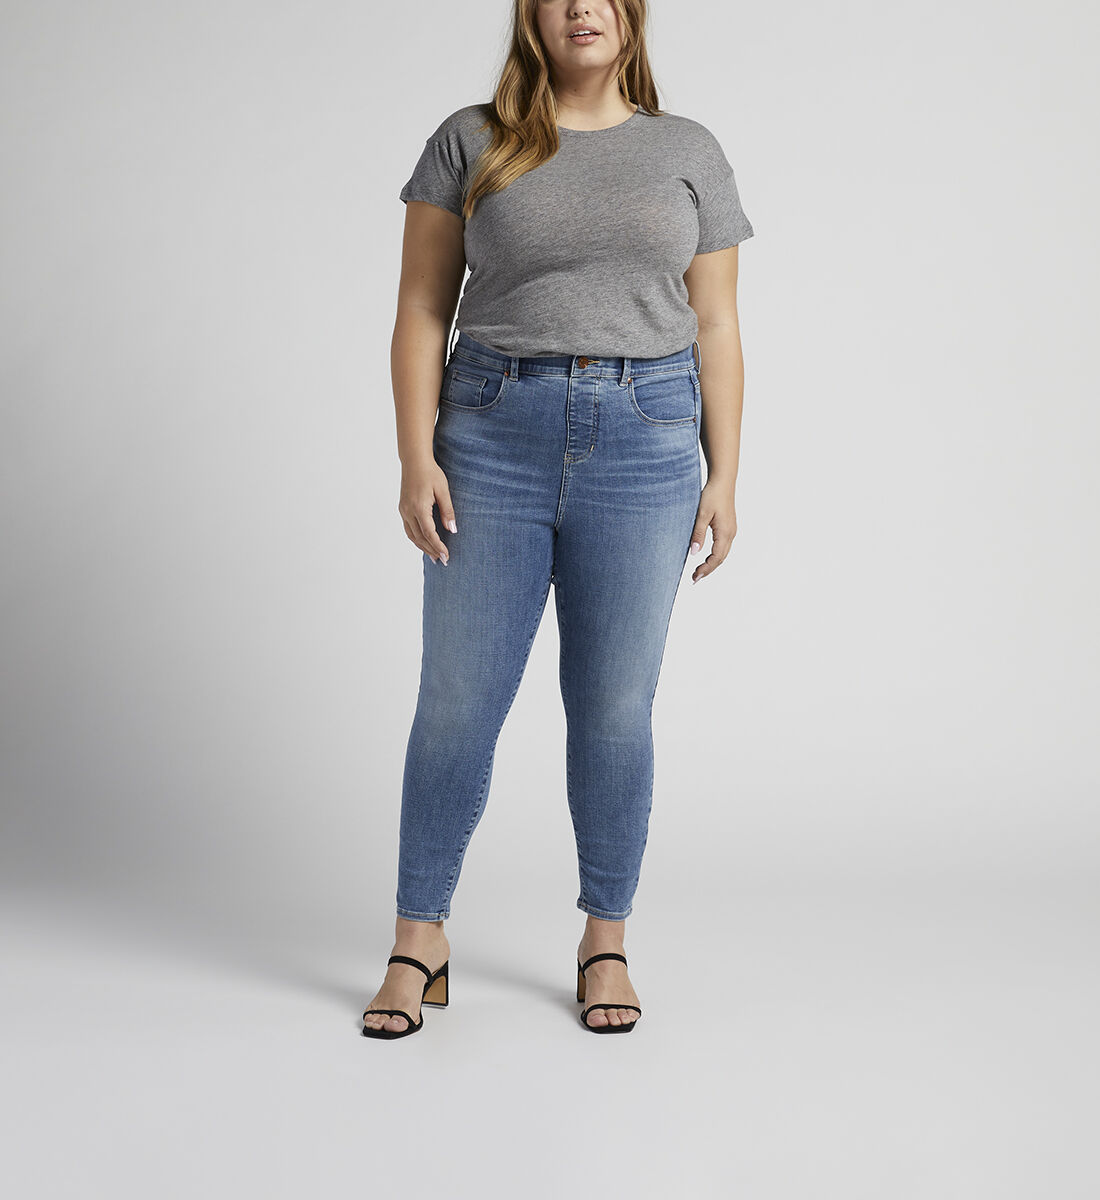 Valentina High Rise Skinny Crop Pull-On Jeans Plus Size Front